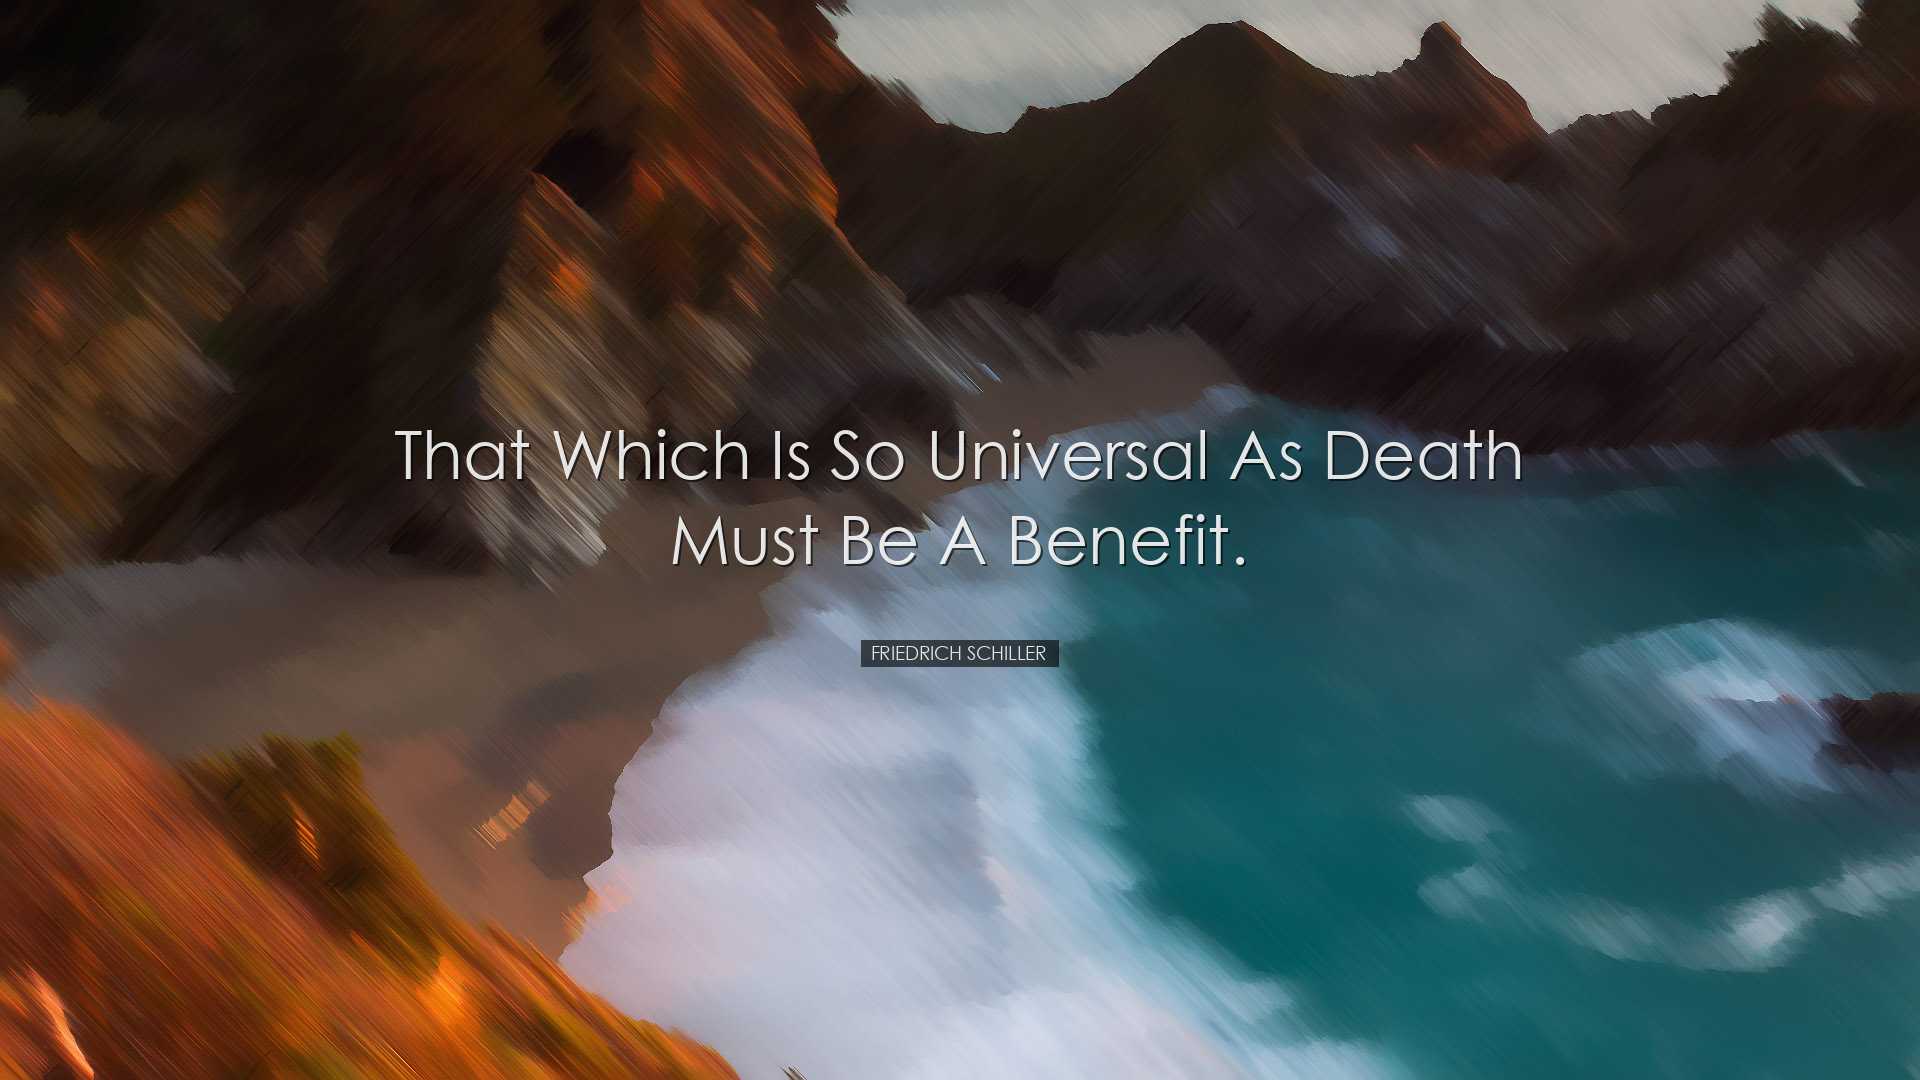 That which is so universal as death must be a benefit. - Friedrich